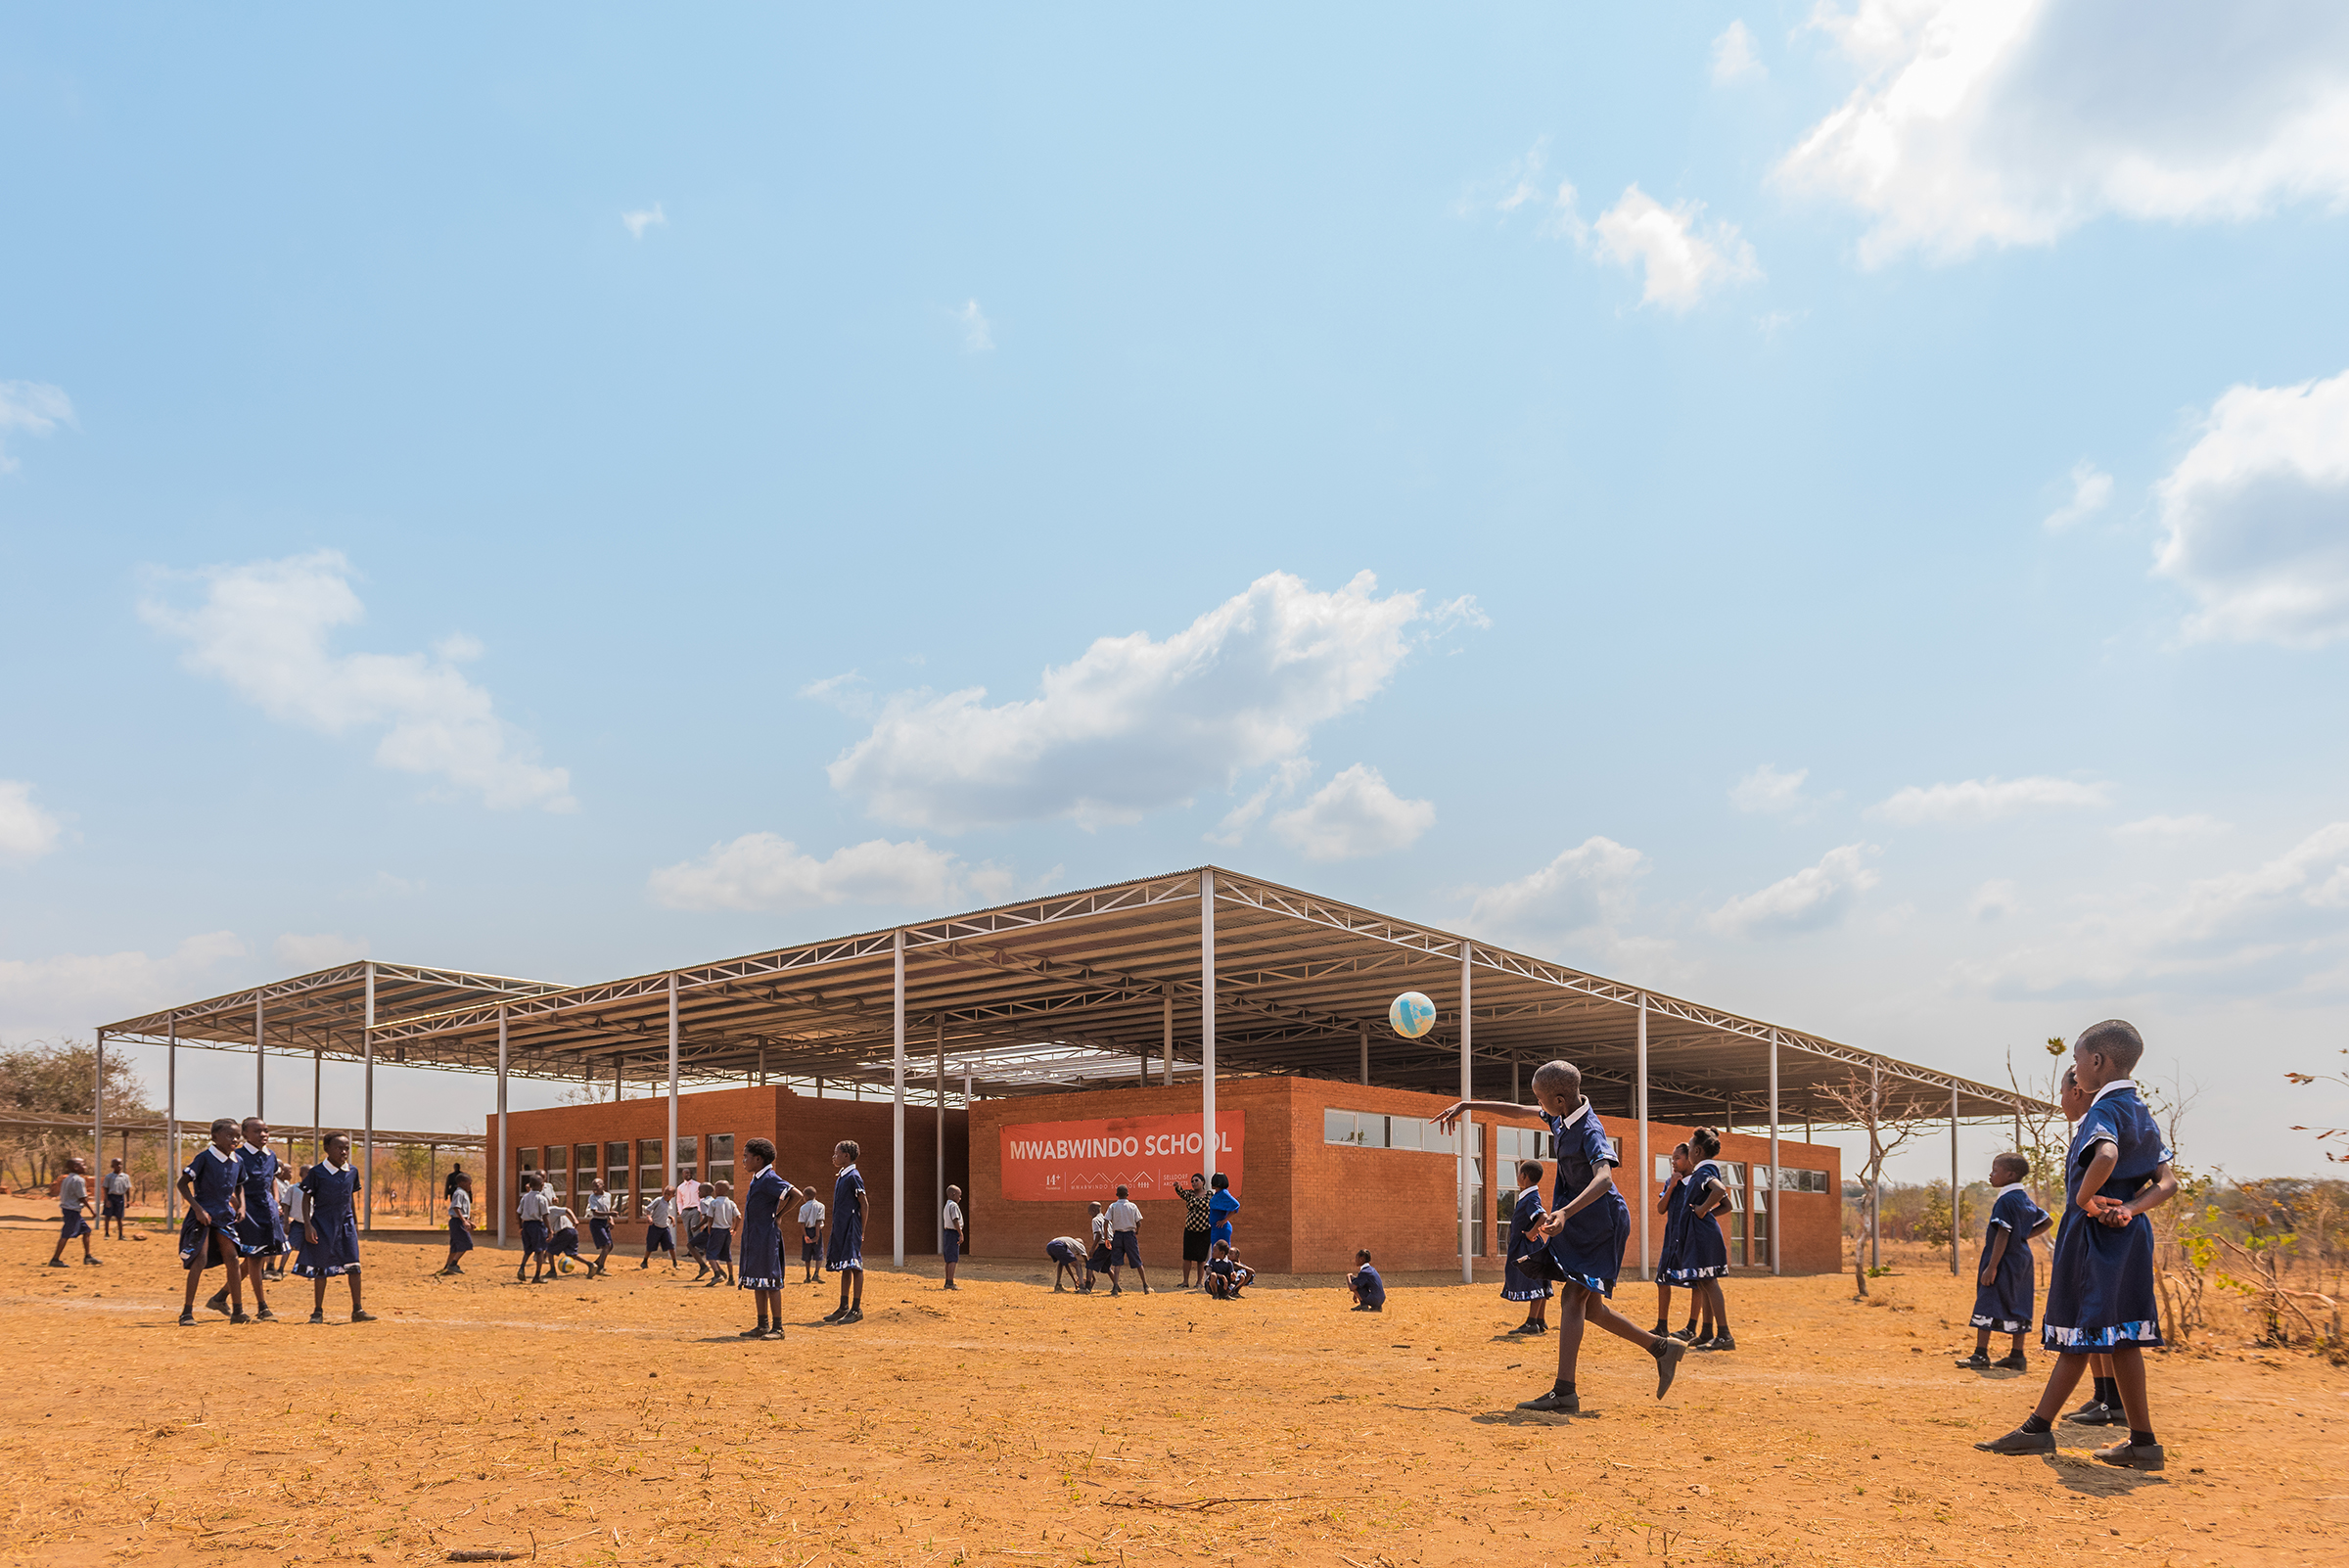 This is an image of the exterior of the Mwabwindo School